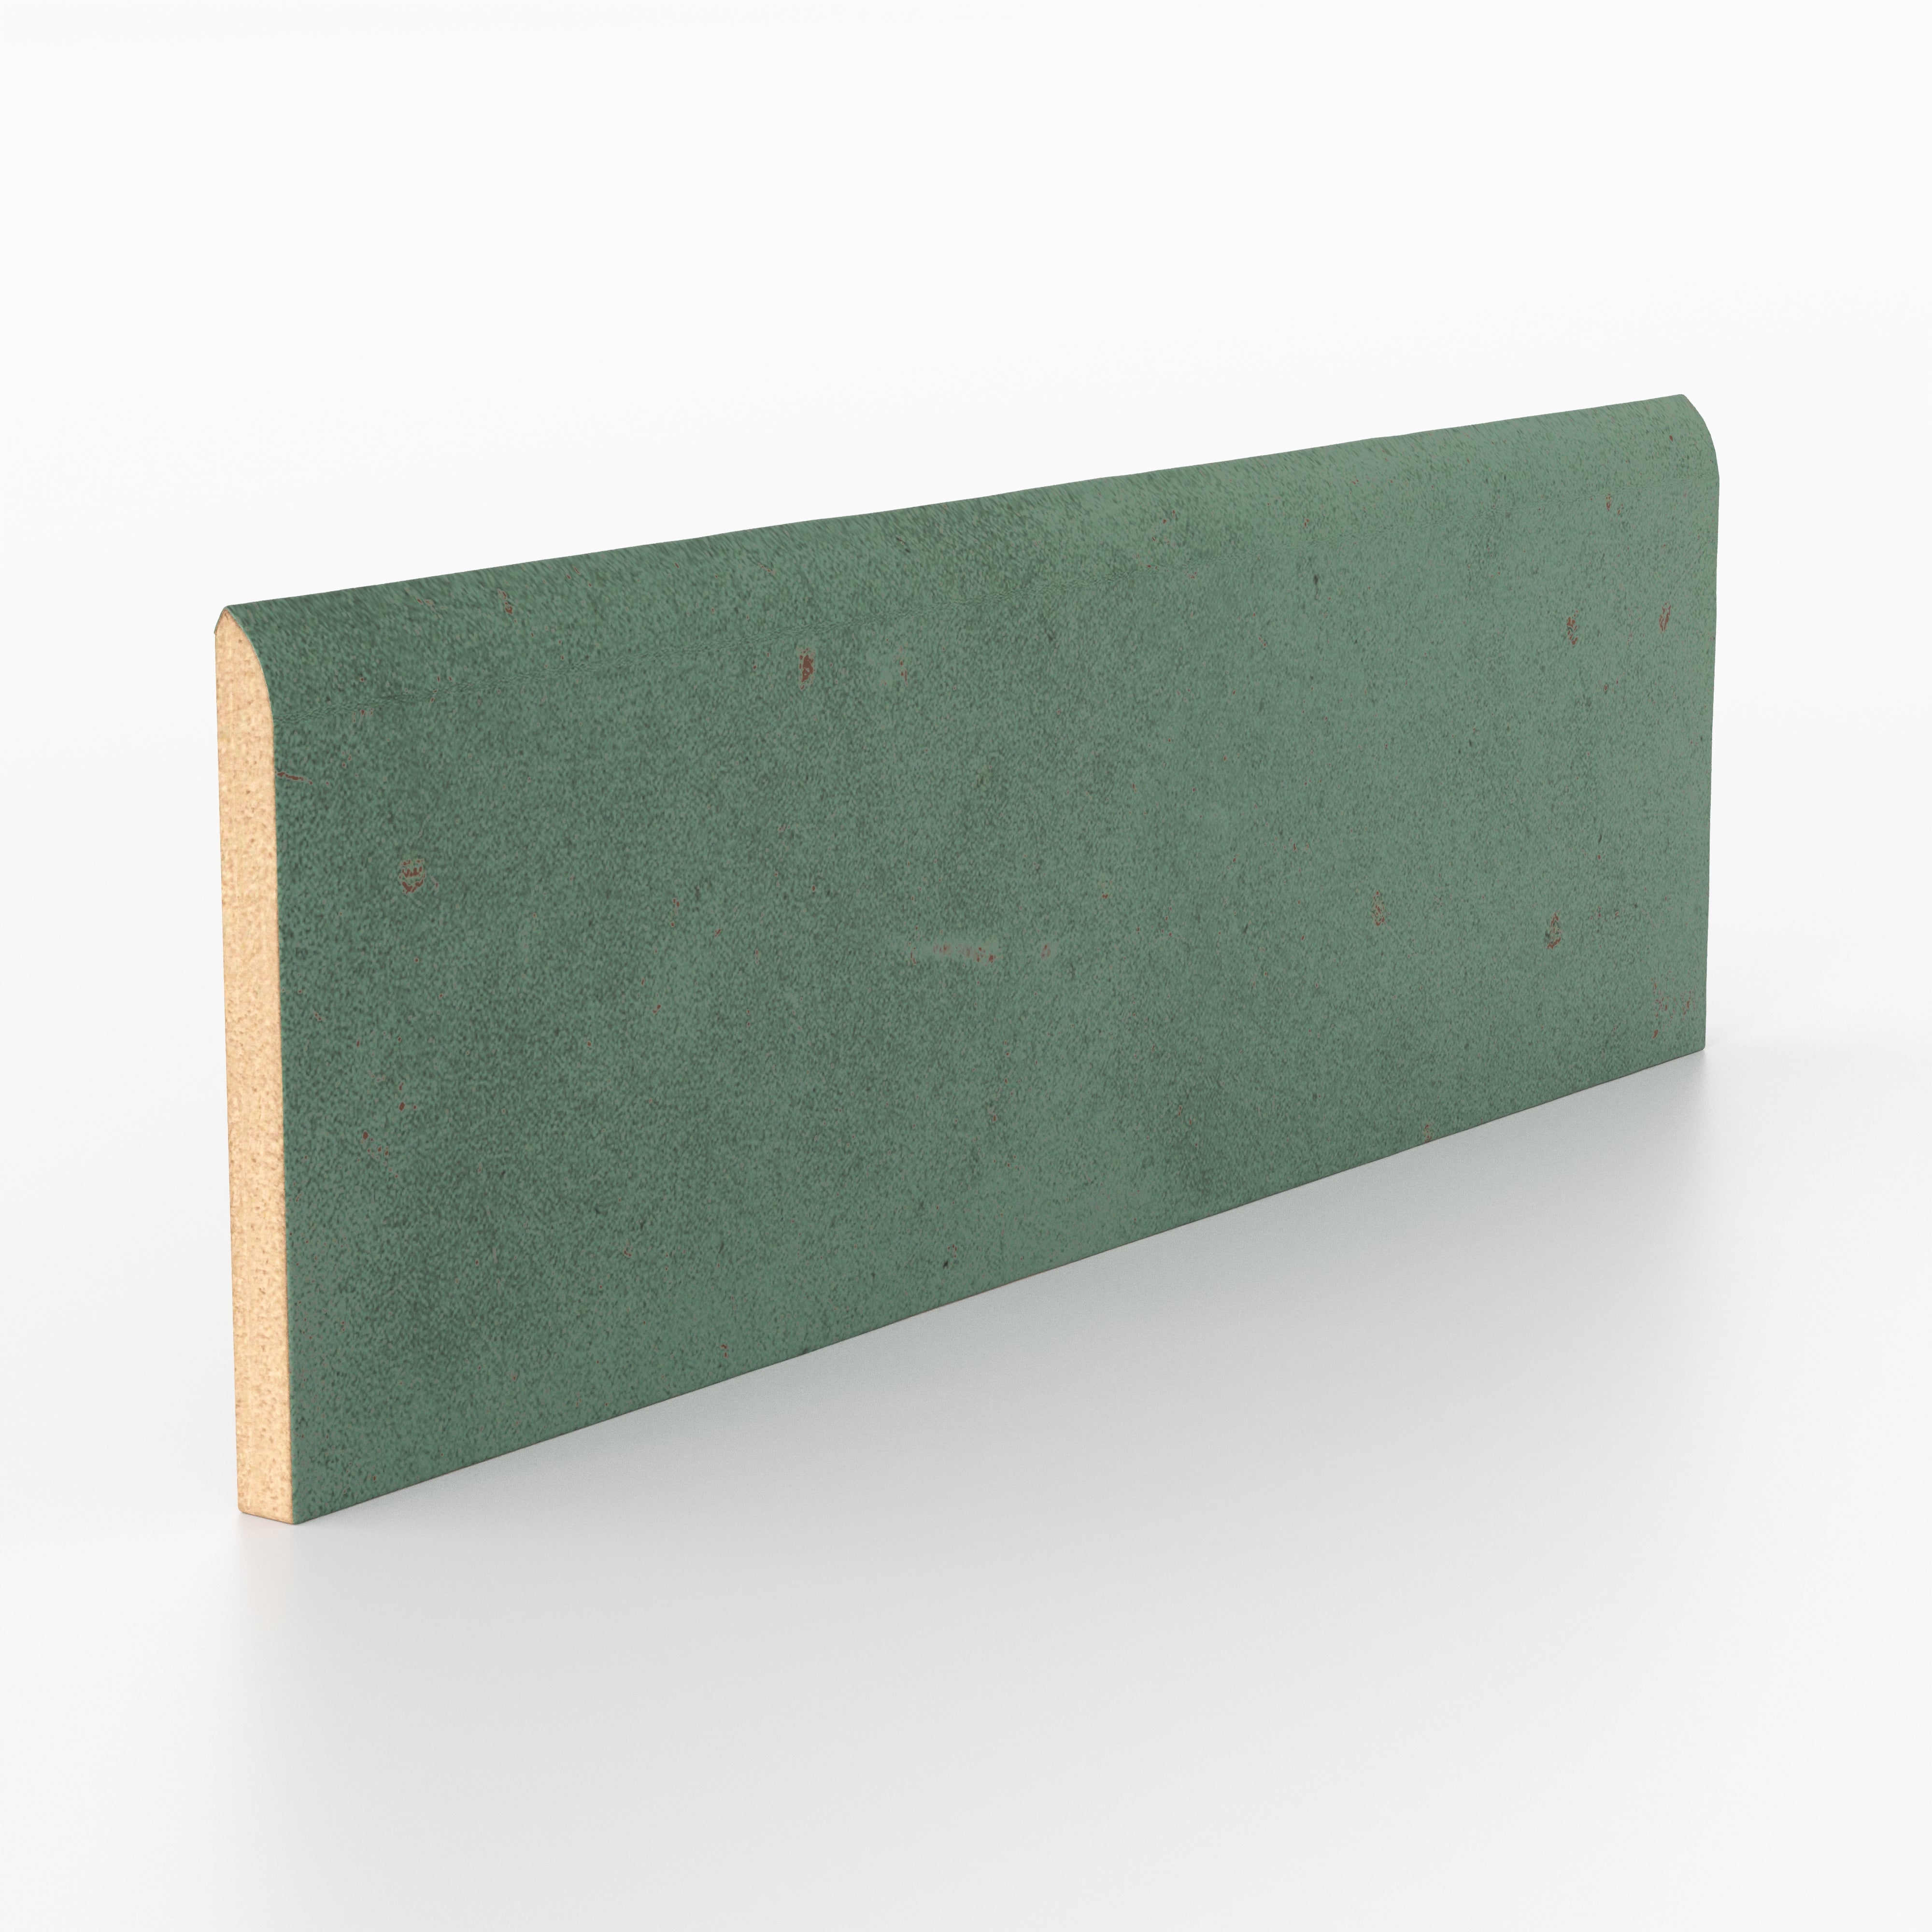 Everly 3x8 Matte Ceramic Bullnose Tile in Forest